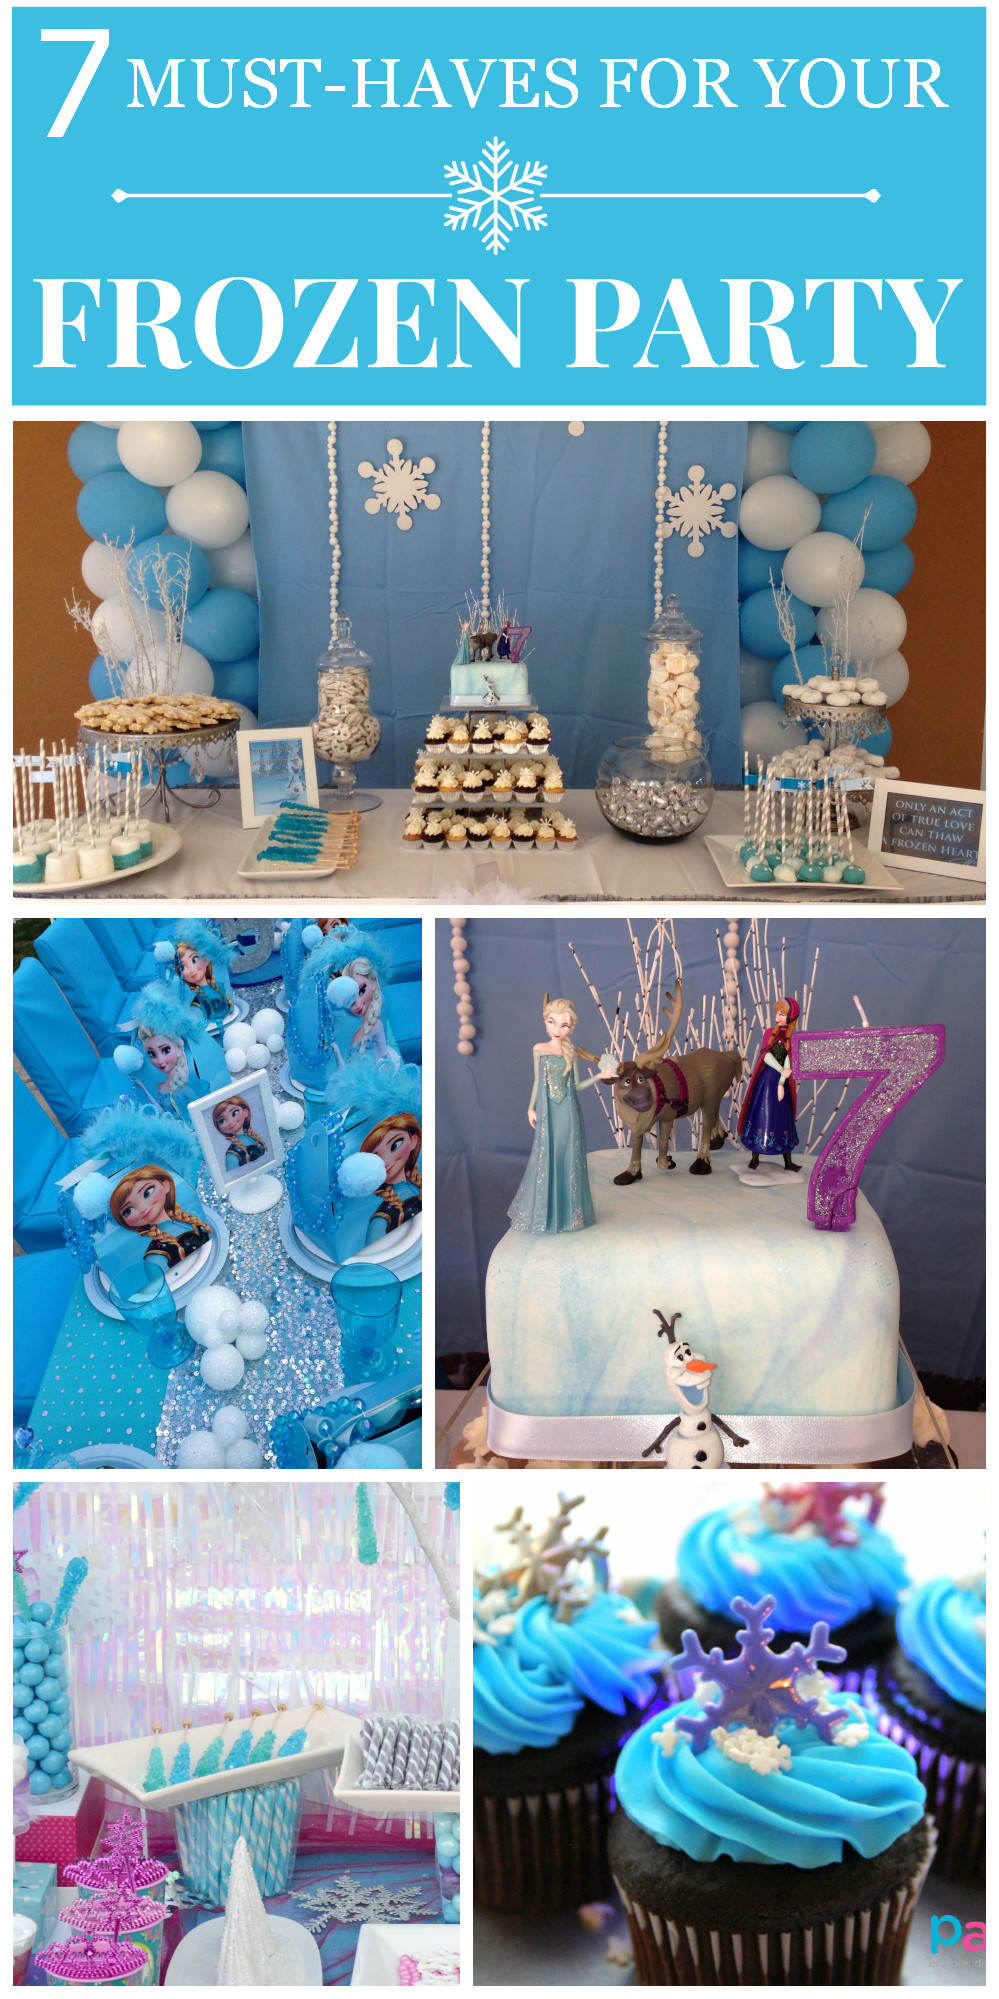 Frozen Birthday Party Supplies
 7 Things You Must Have at Your Frozen Party